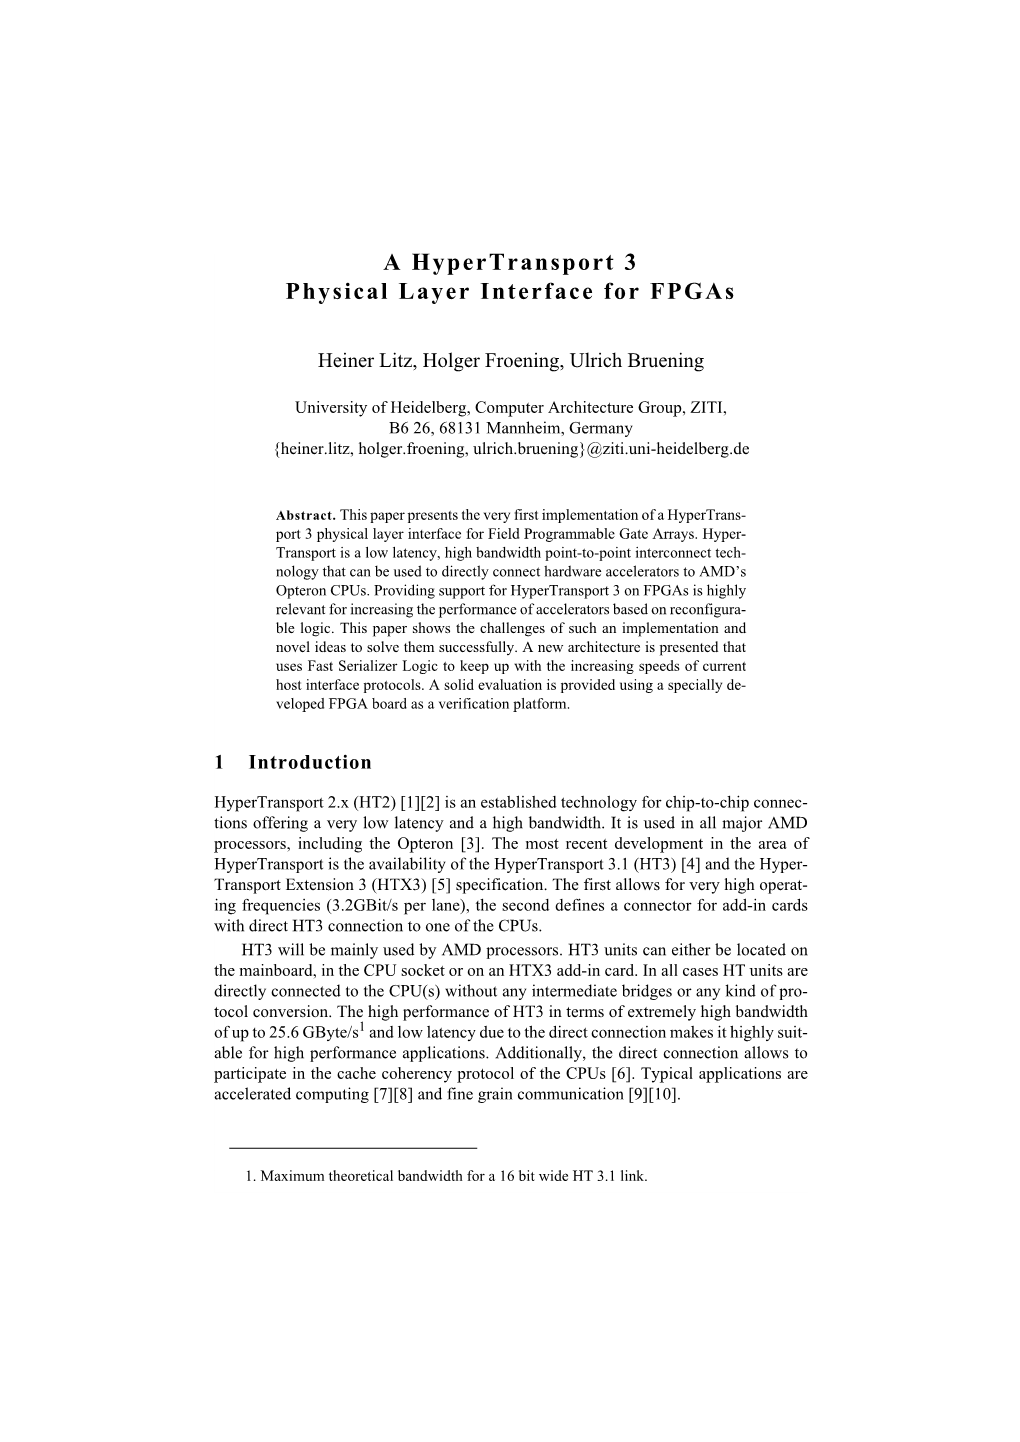 A Hypertransport 3 Physical Layer Interface for Fpgas